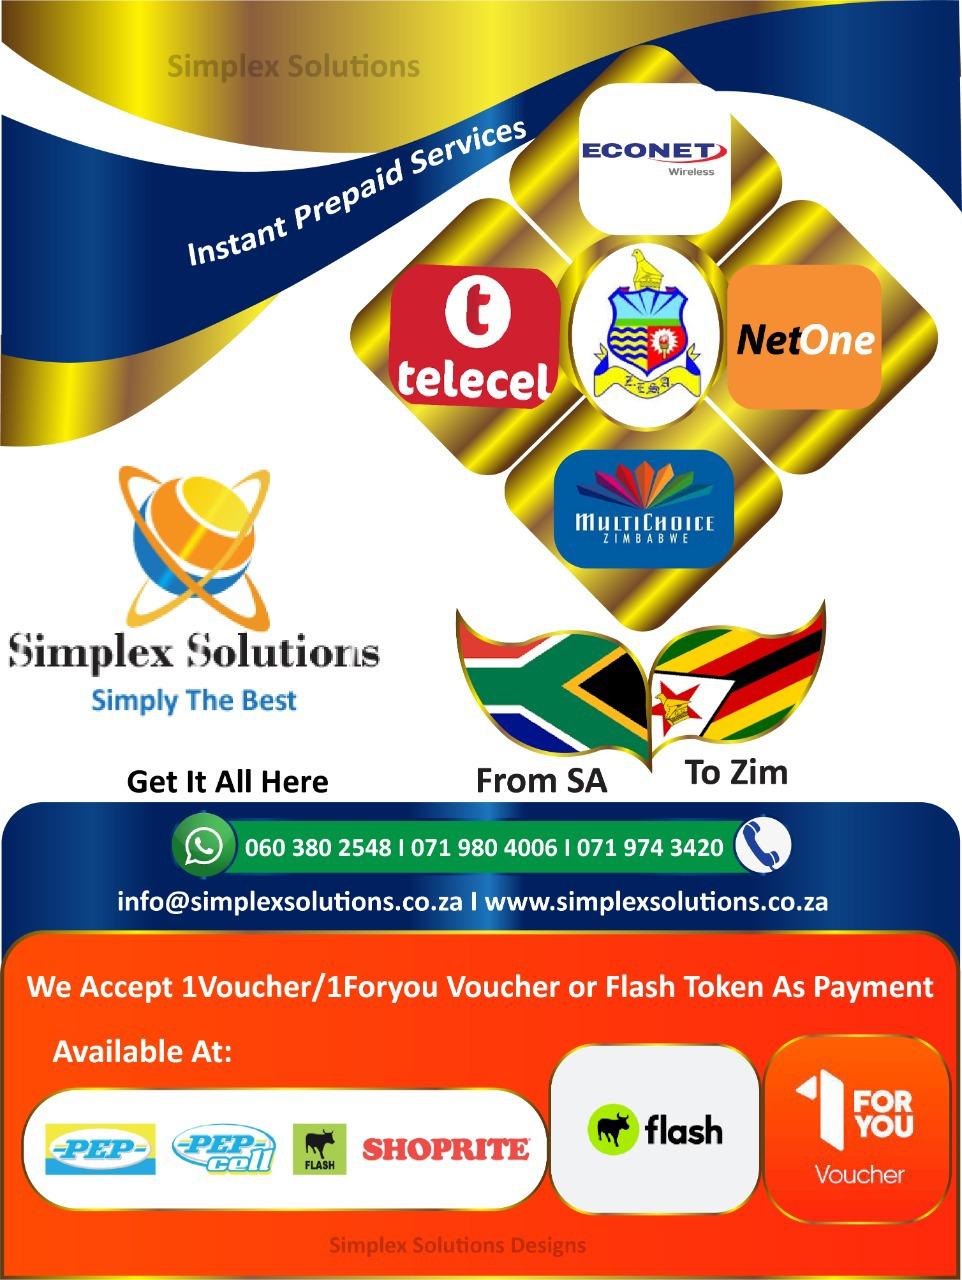 Buy Airtime & Data for Zimbabwe mobile networks - Cover Image